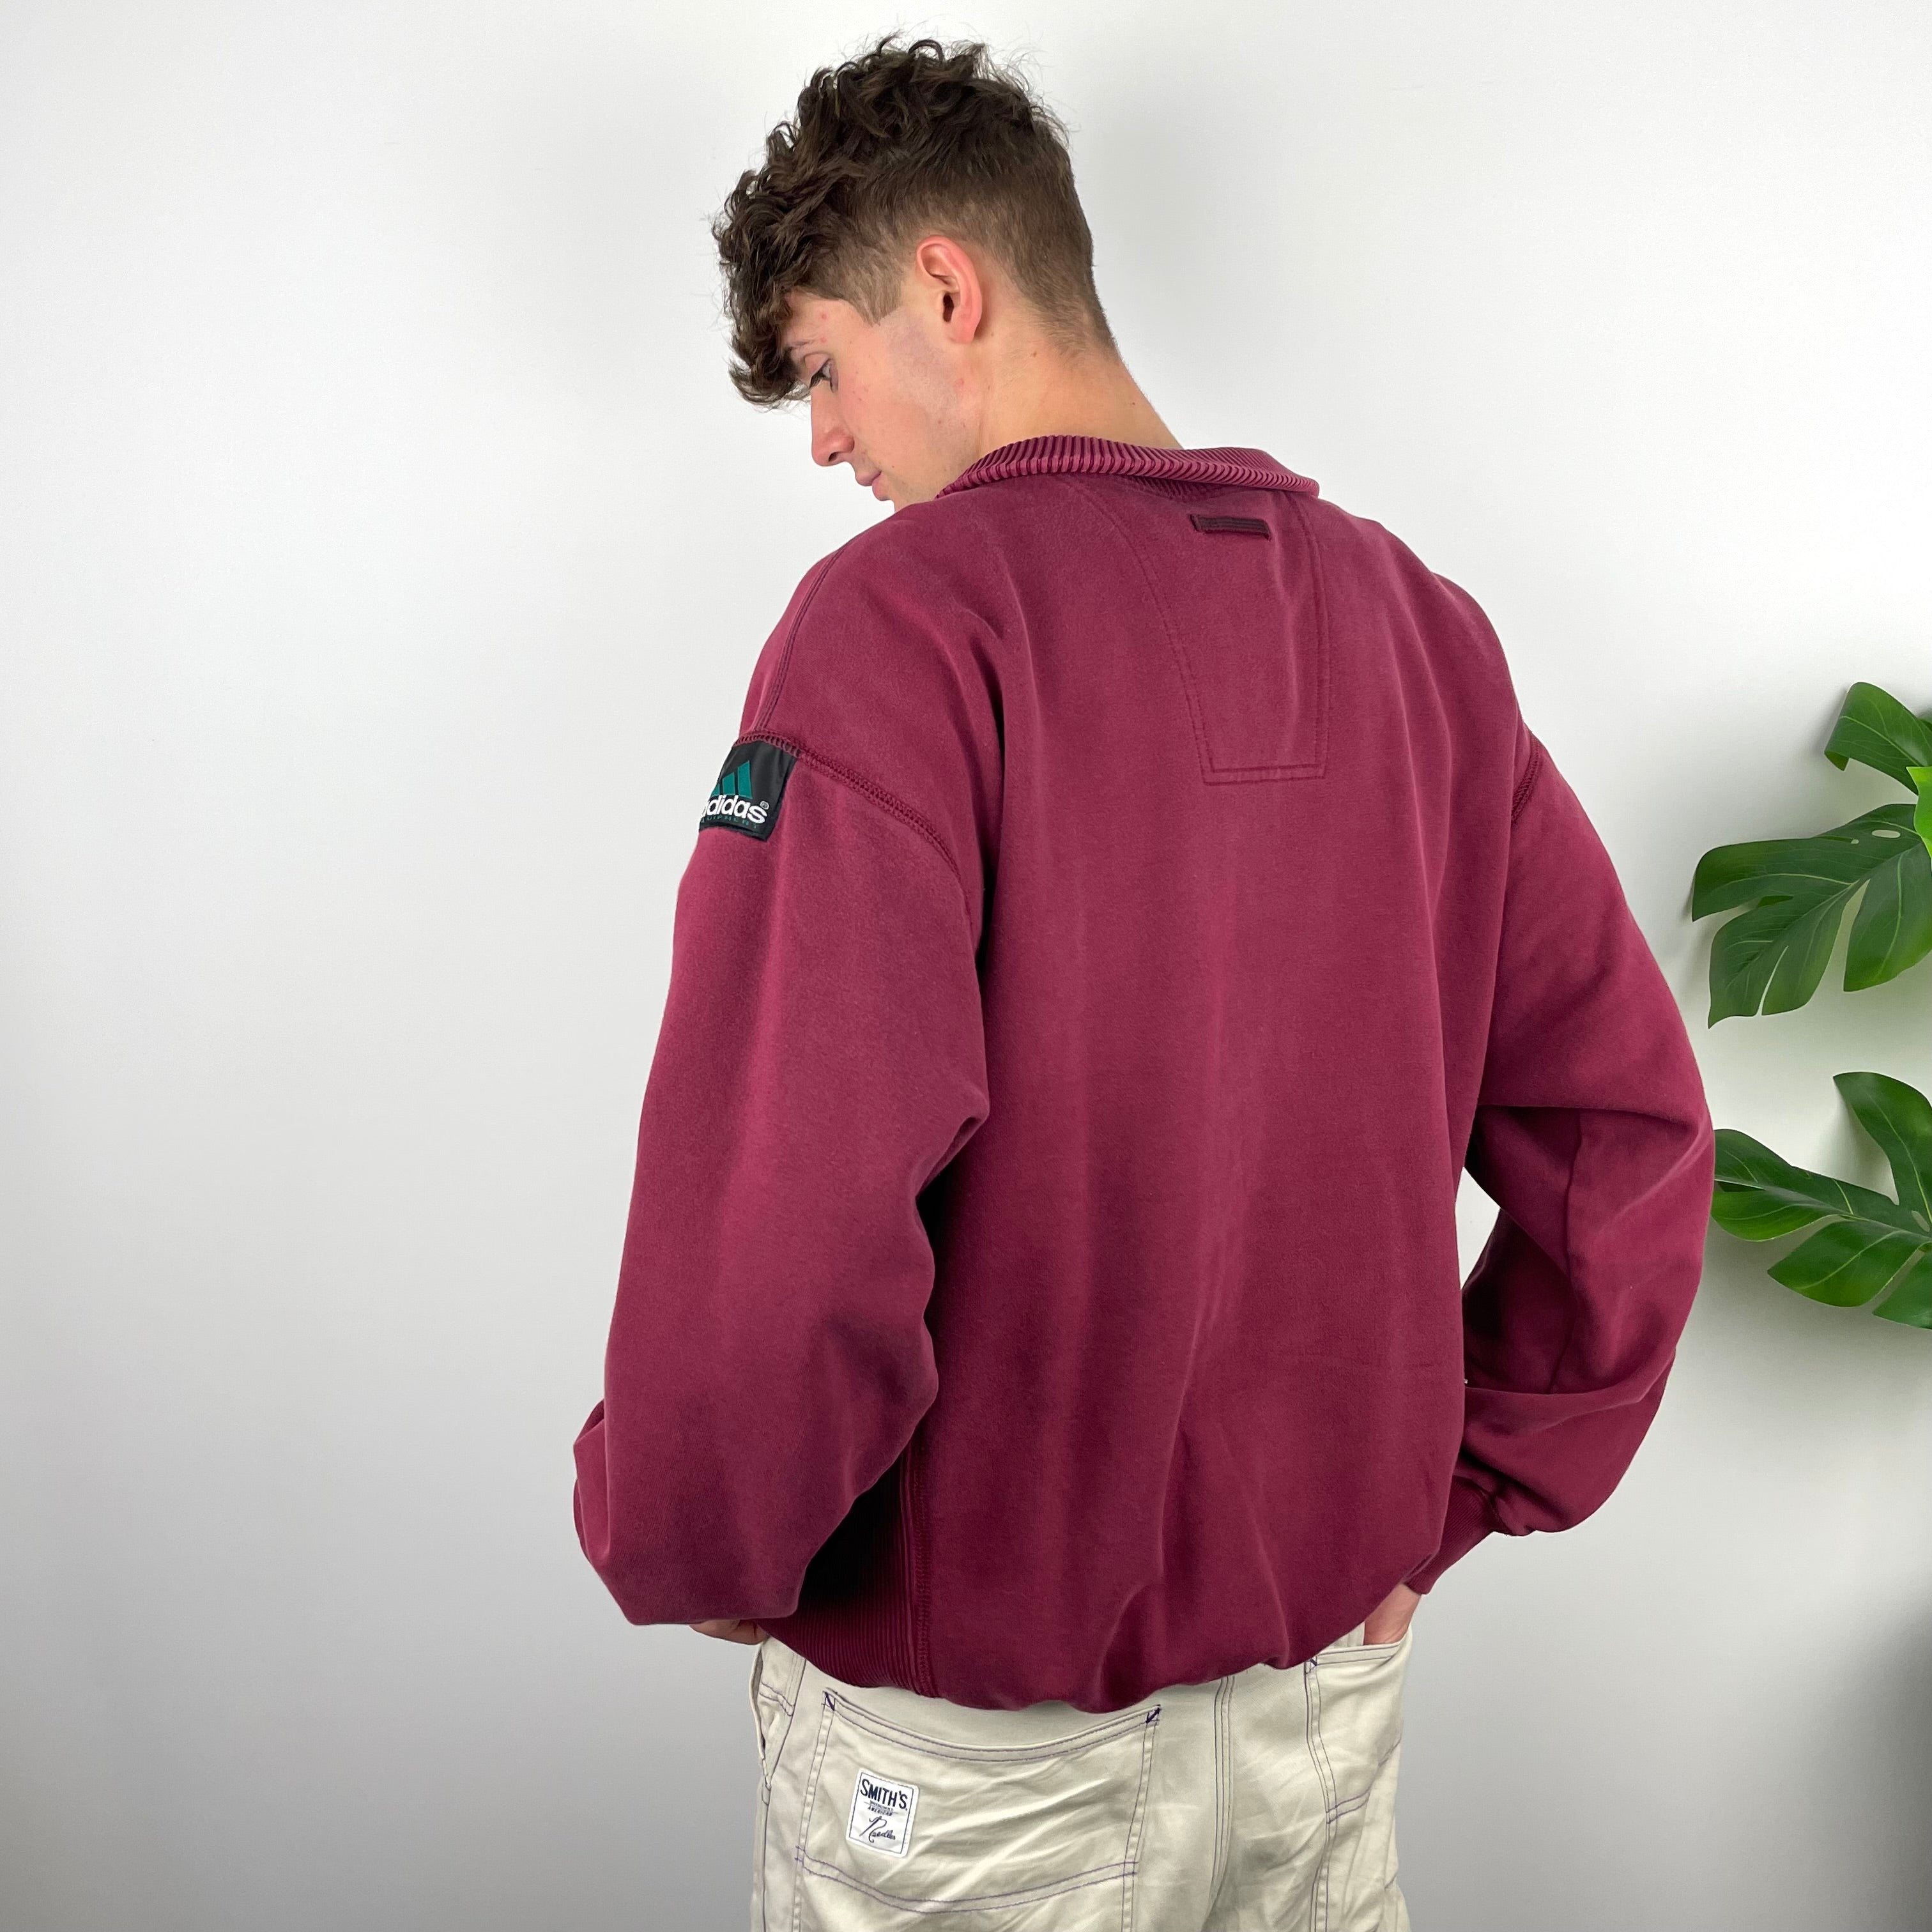 Adidas Equipment EQT RARE Maroon Embroidered Spell Out Quarter Zip Sweatshirt (XL)